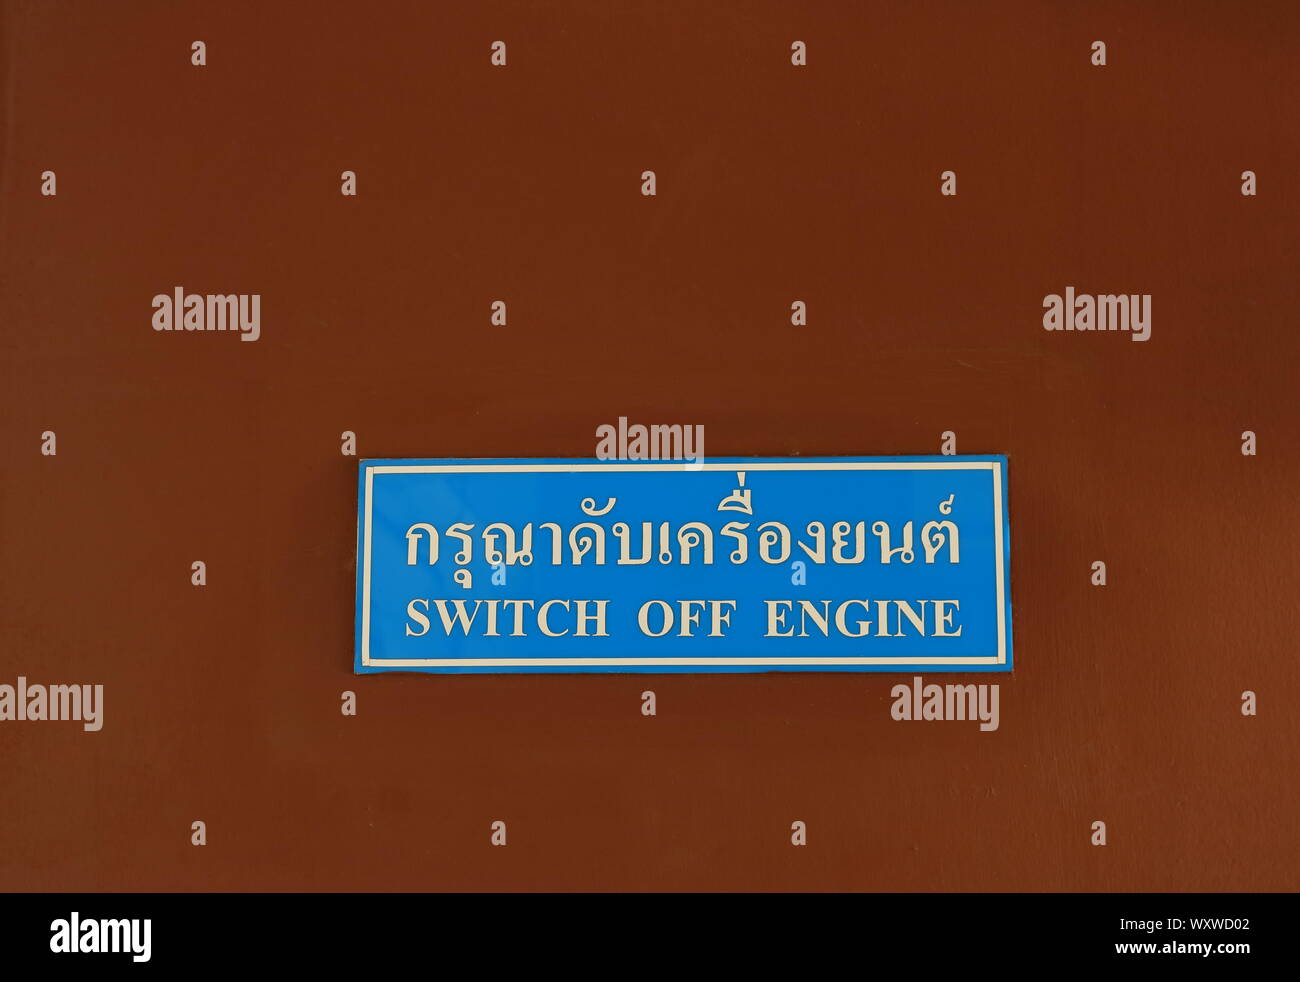 Closeup rectangular sign installed on the wall read switch off engine in both Thai and English language Stock Photo